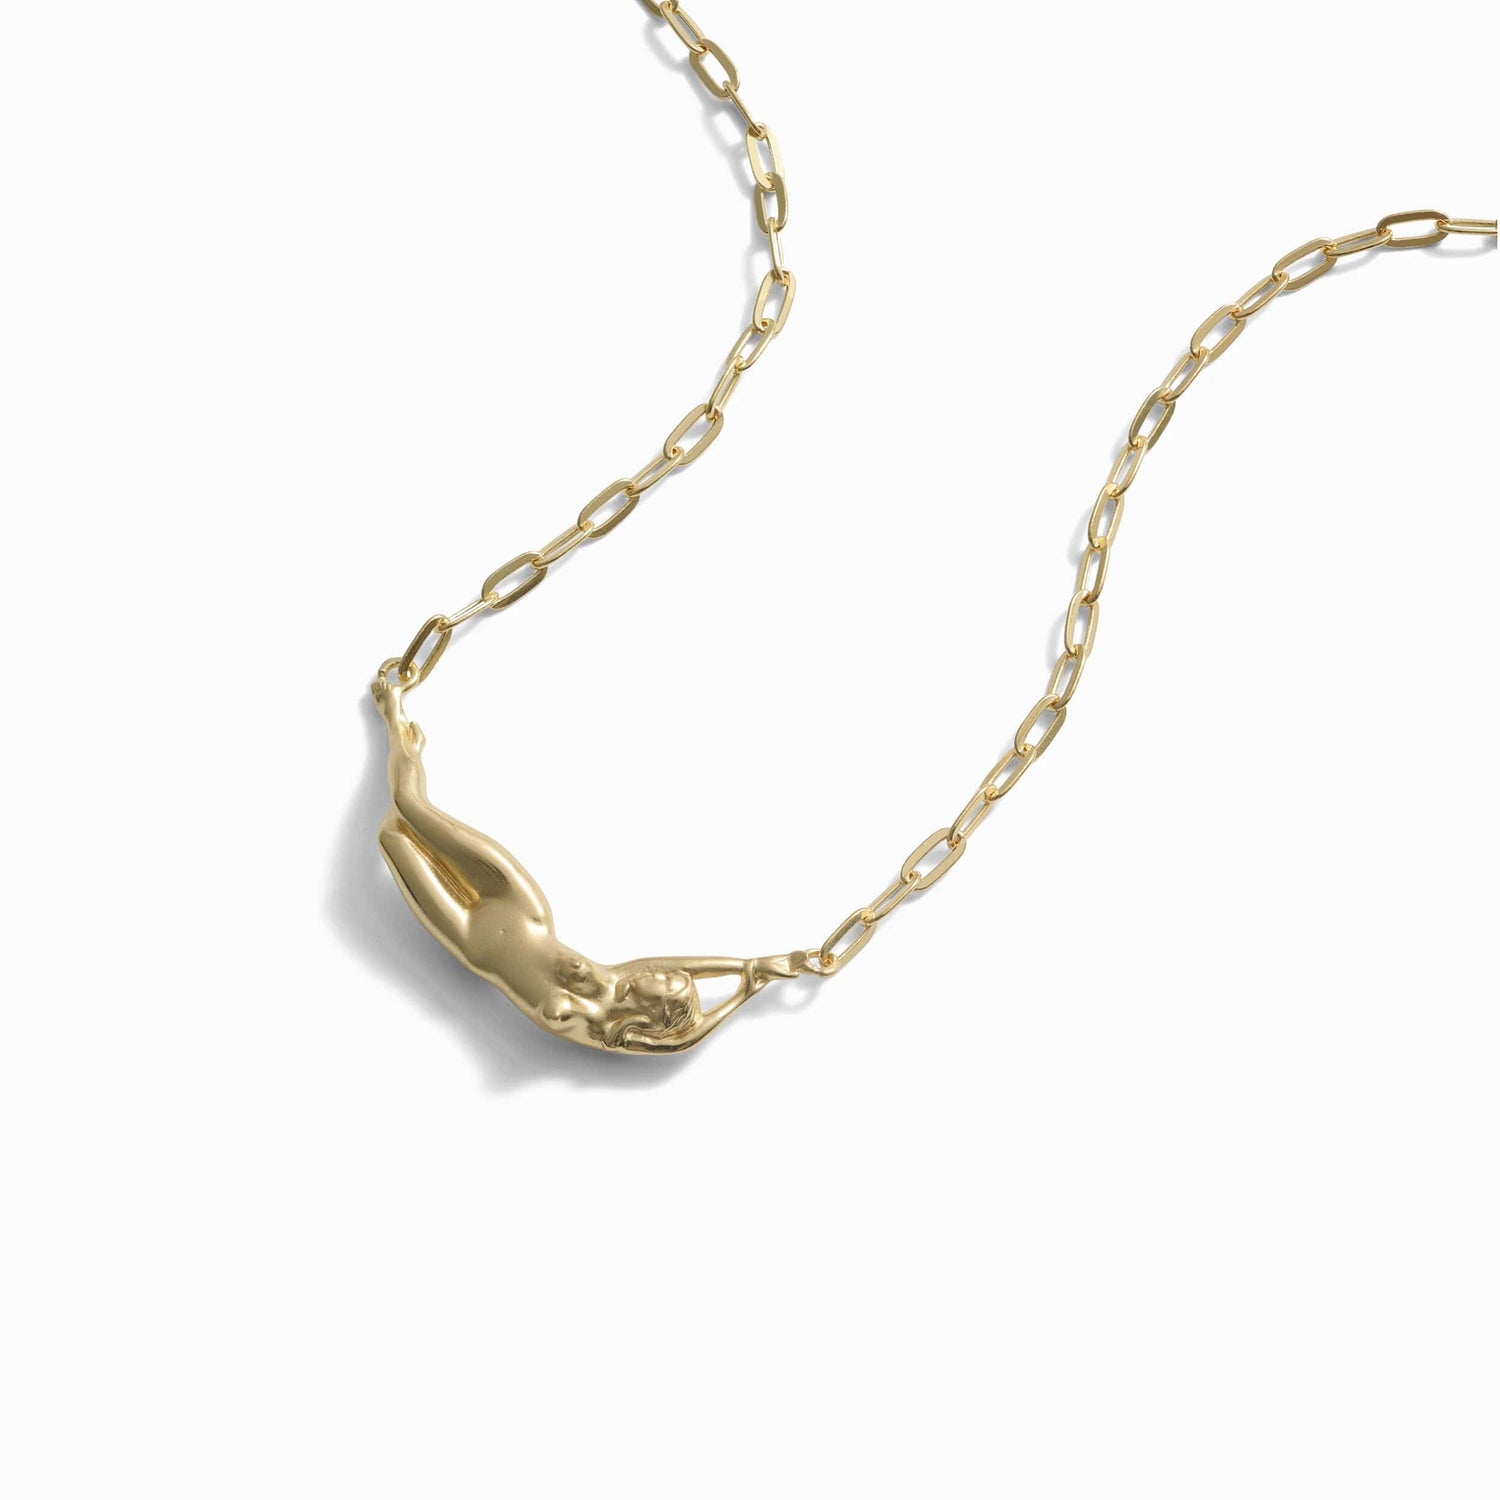 Product image of Awe Inspired Necklaces 14K Yellow Gold Vermeil Divine Feminine Necklace